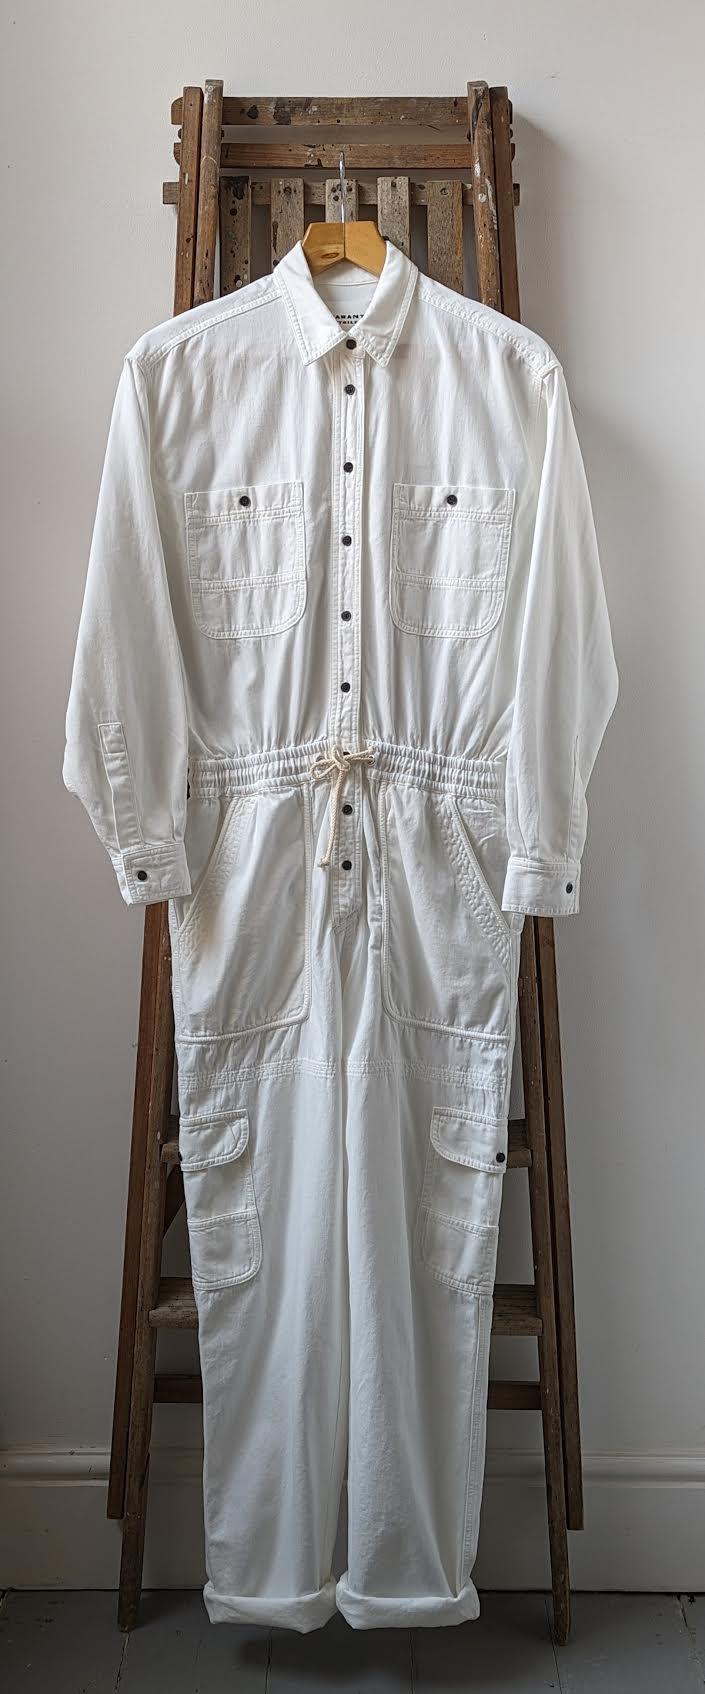 Isabel Marant Etoile - Veado White Overall - 32 The Guild 